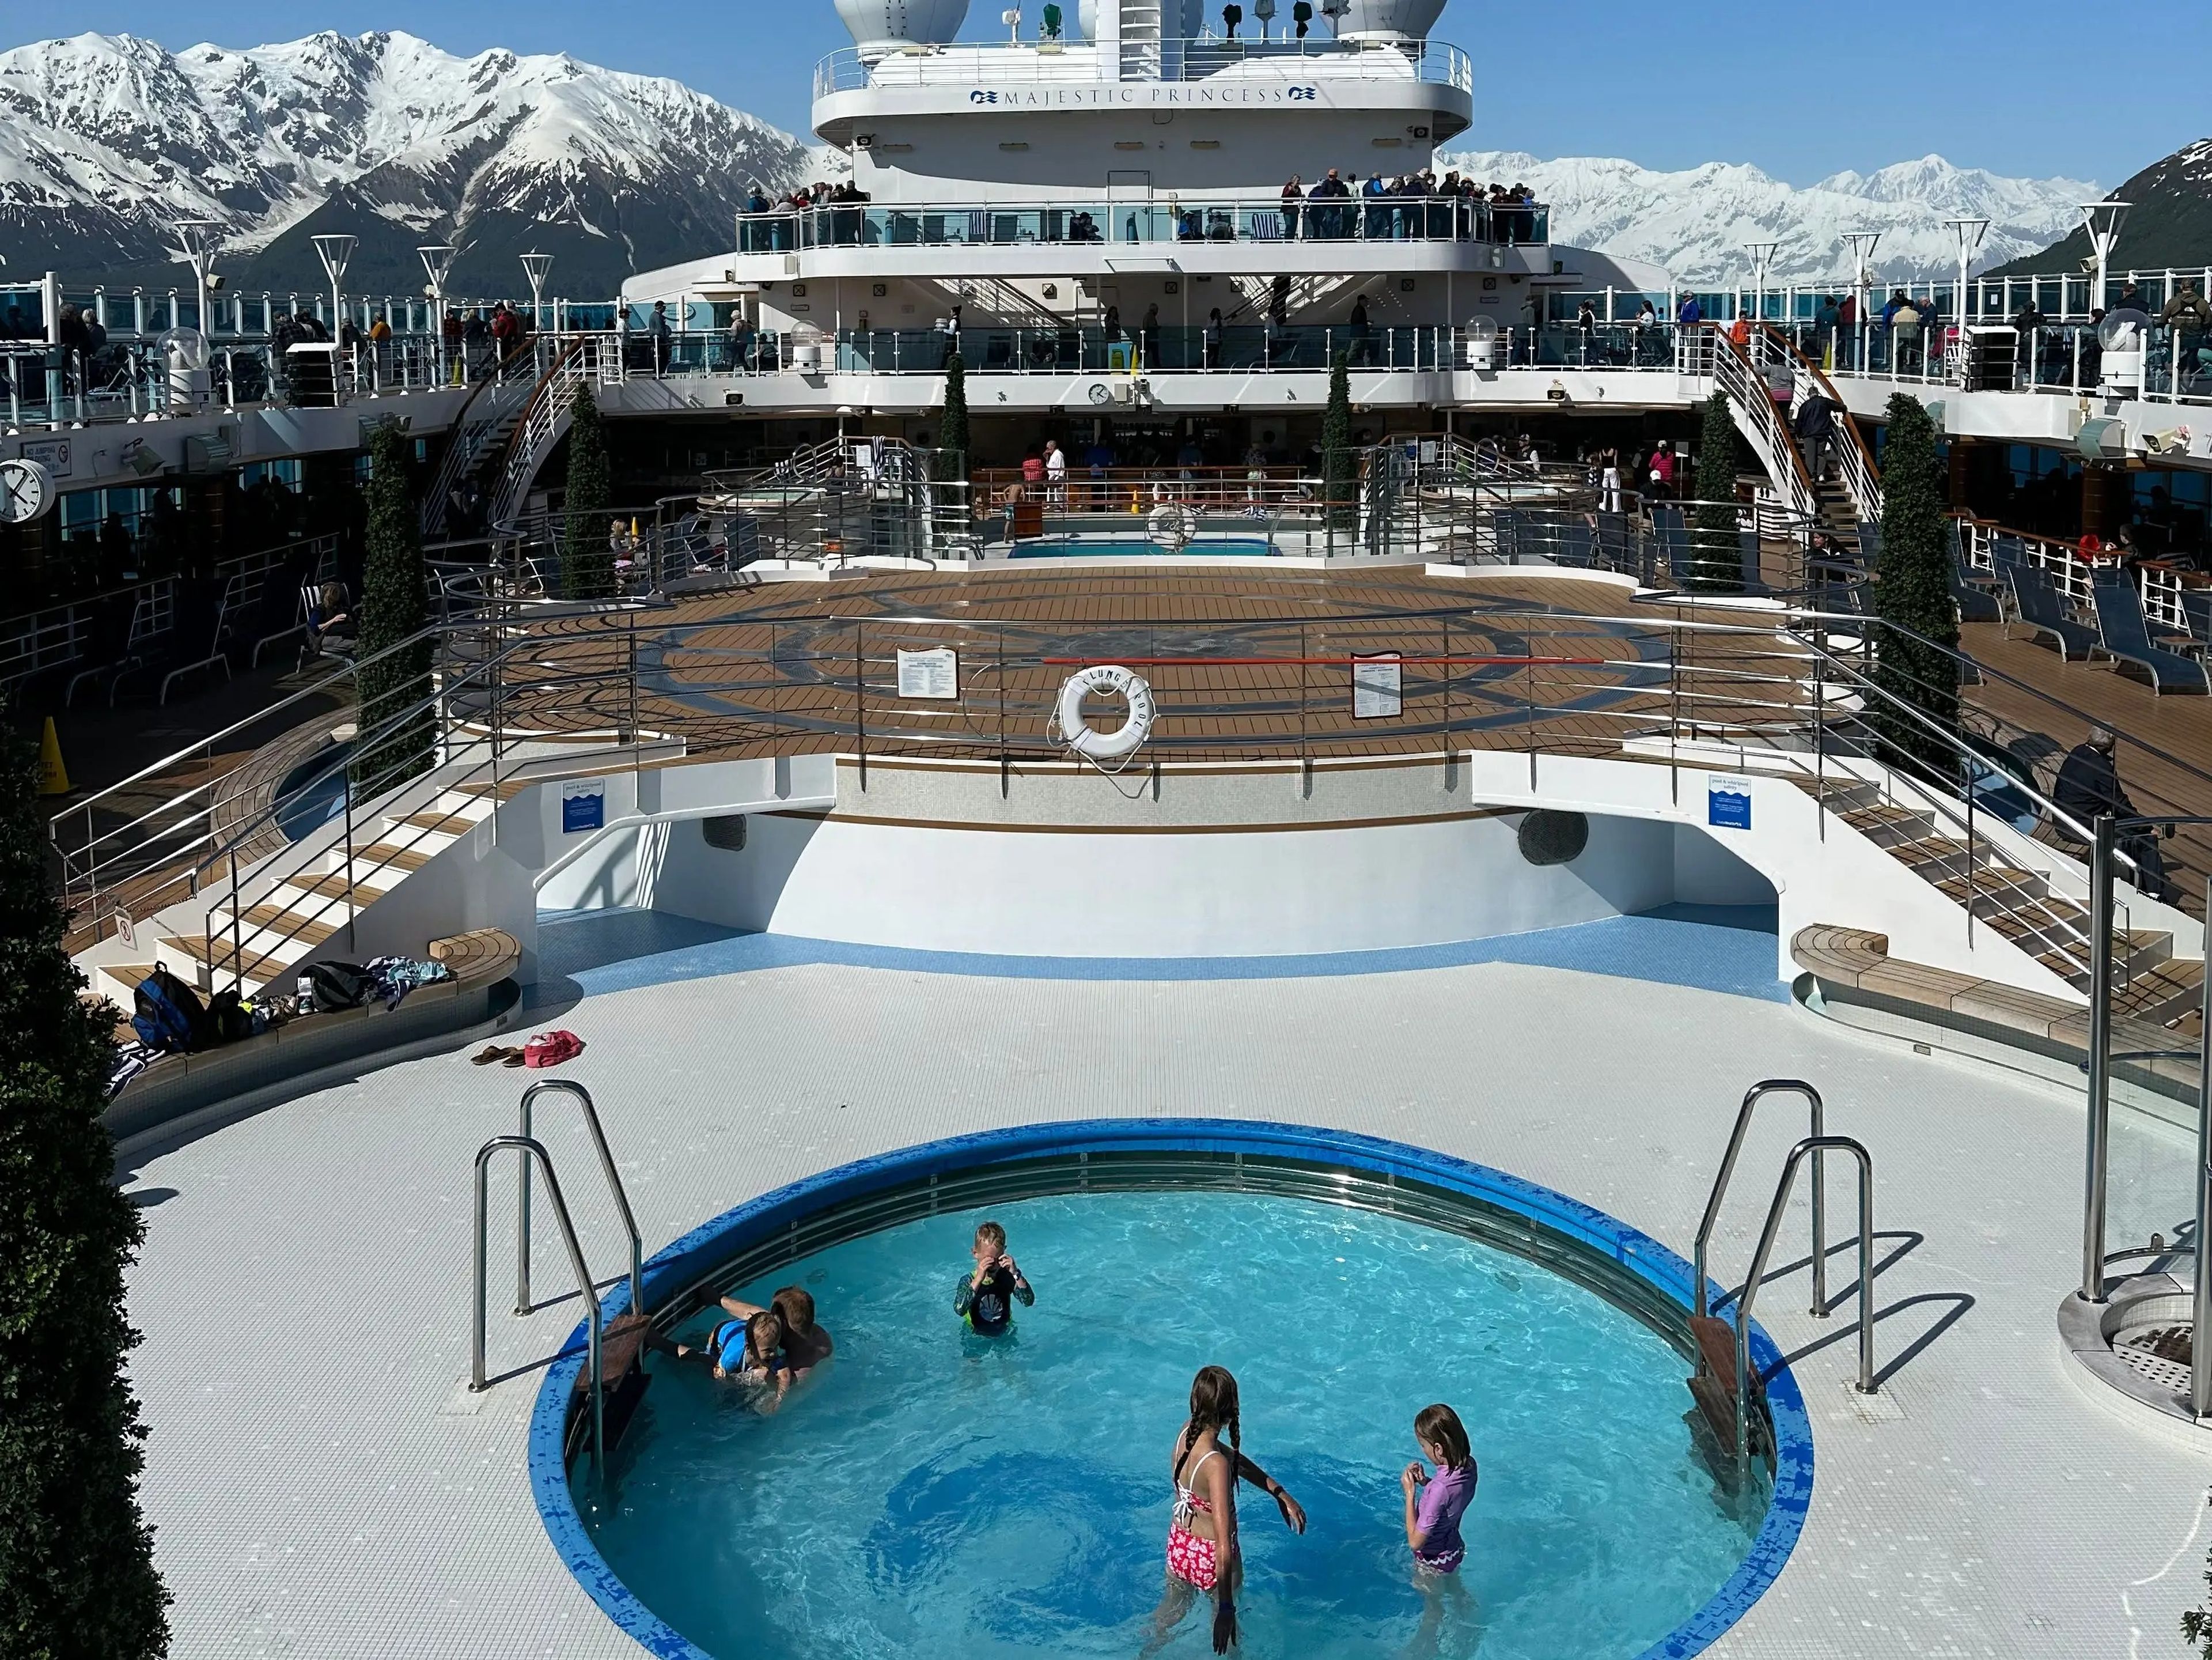 cruise deck with round pool with children on it with snowy mountains in the background